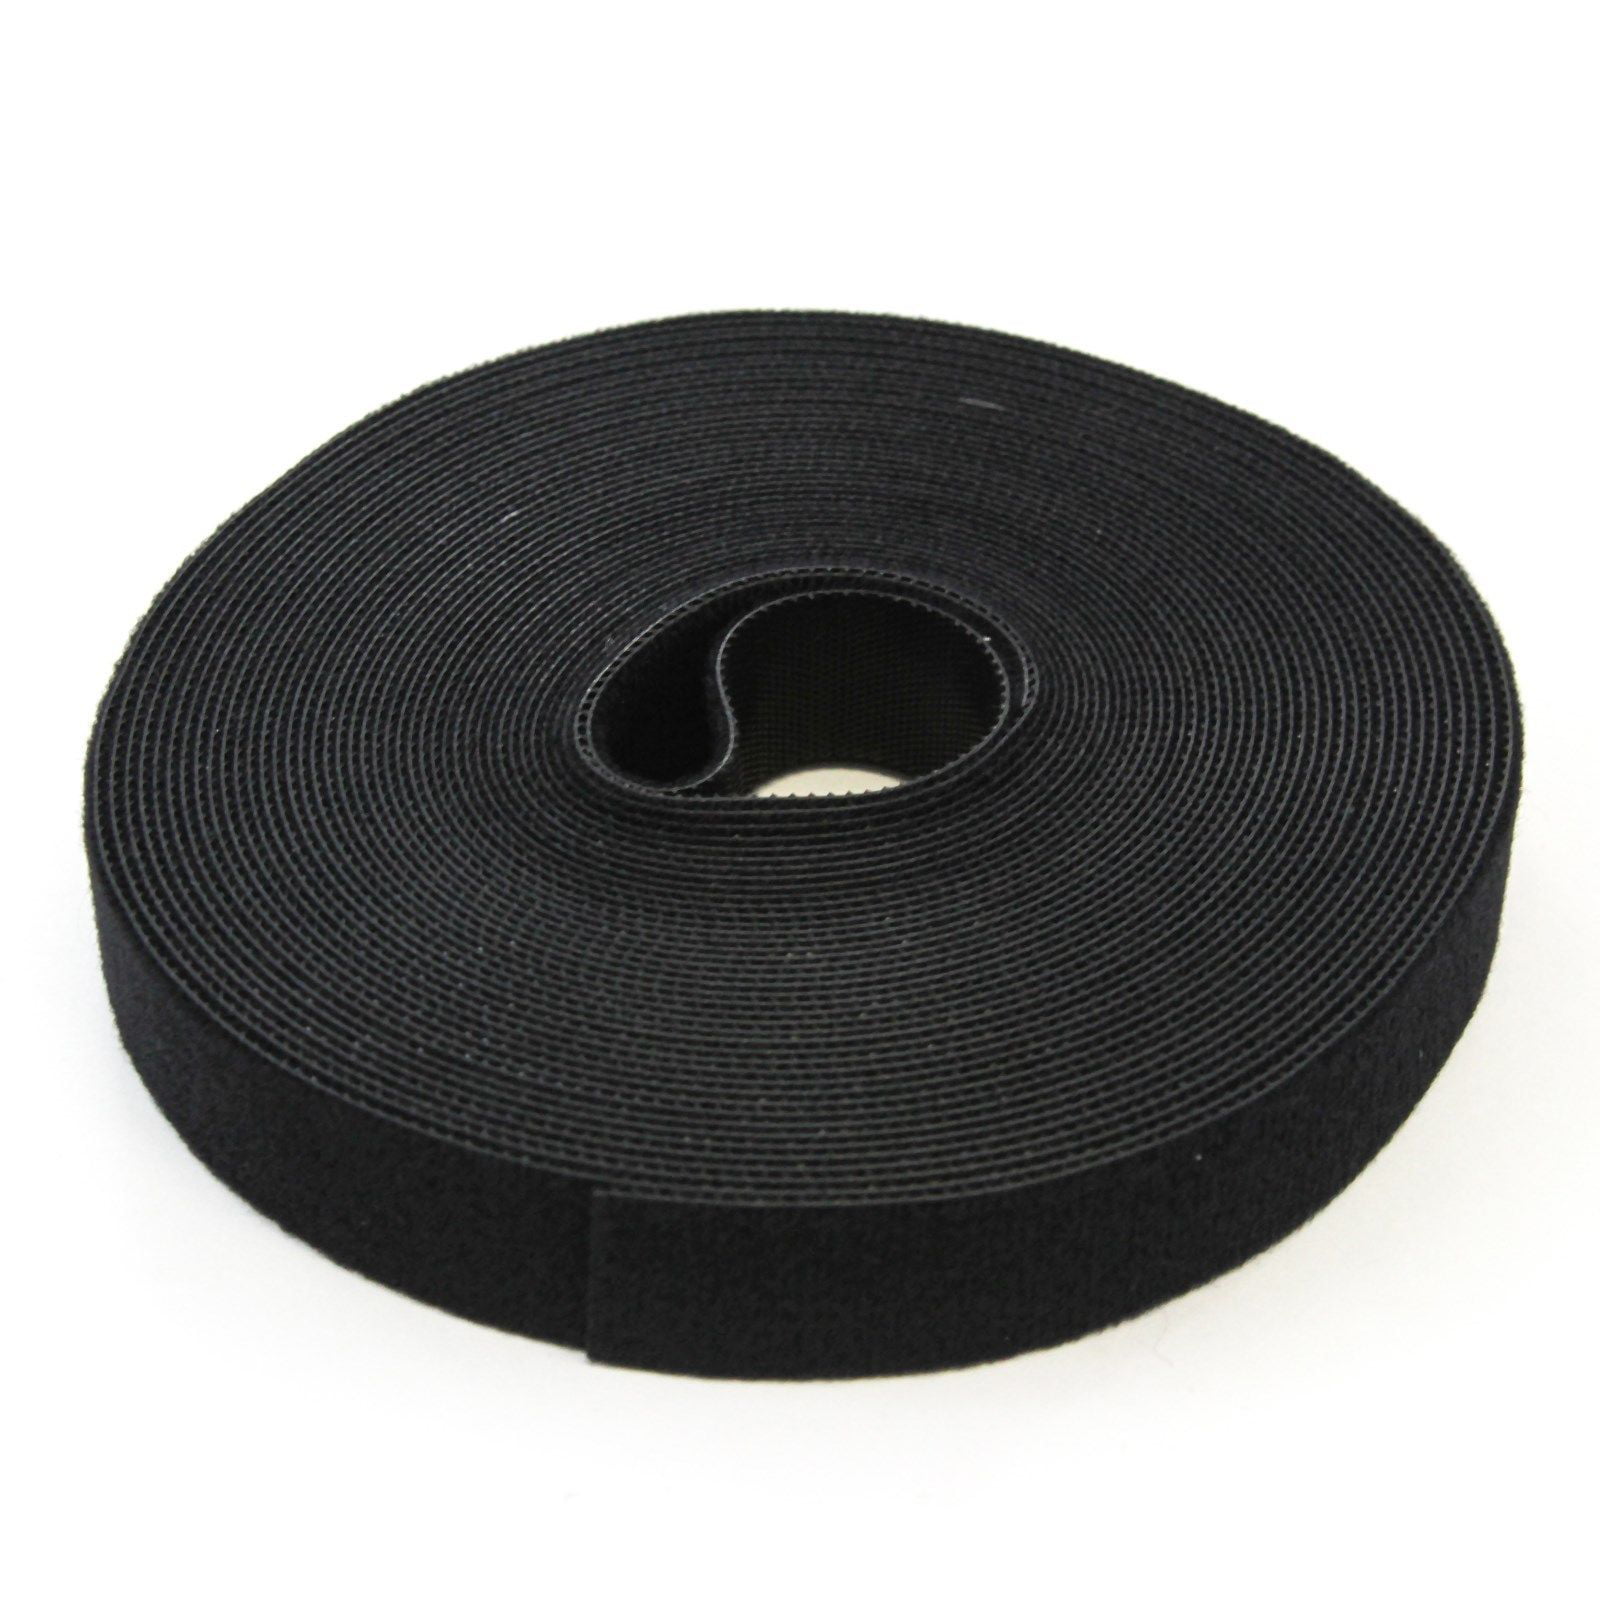 150FT Reusable .5 Roll Hook & Loop Cable Fastening Tape Cord Wraps Straps 1/2